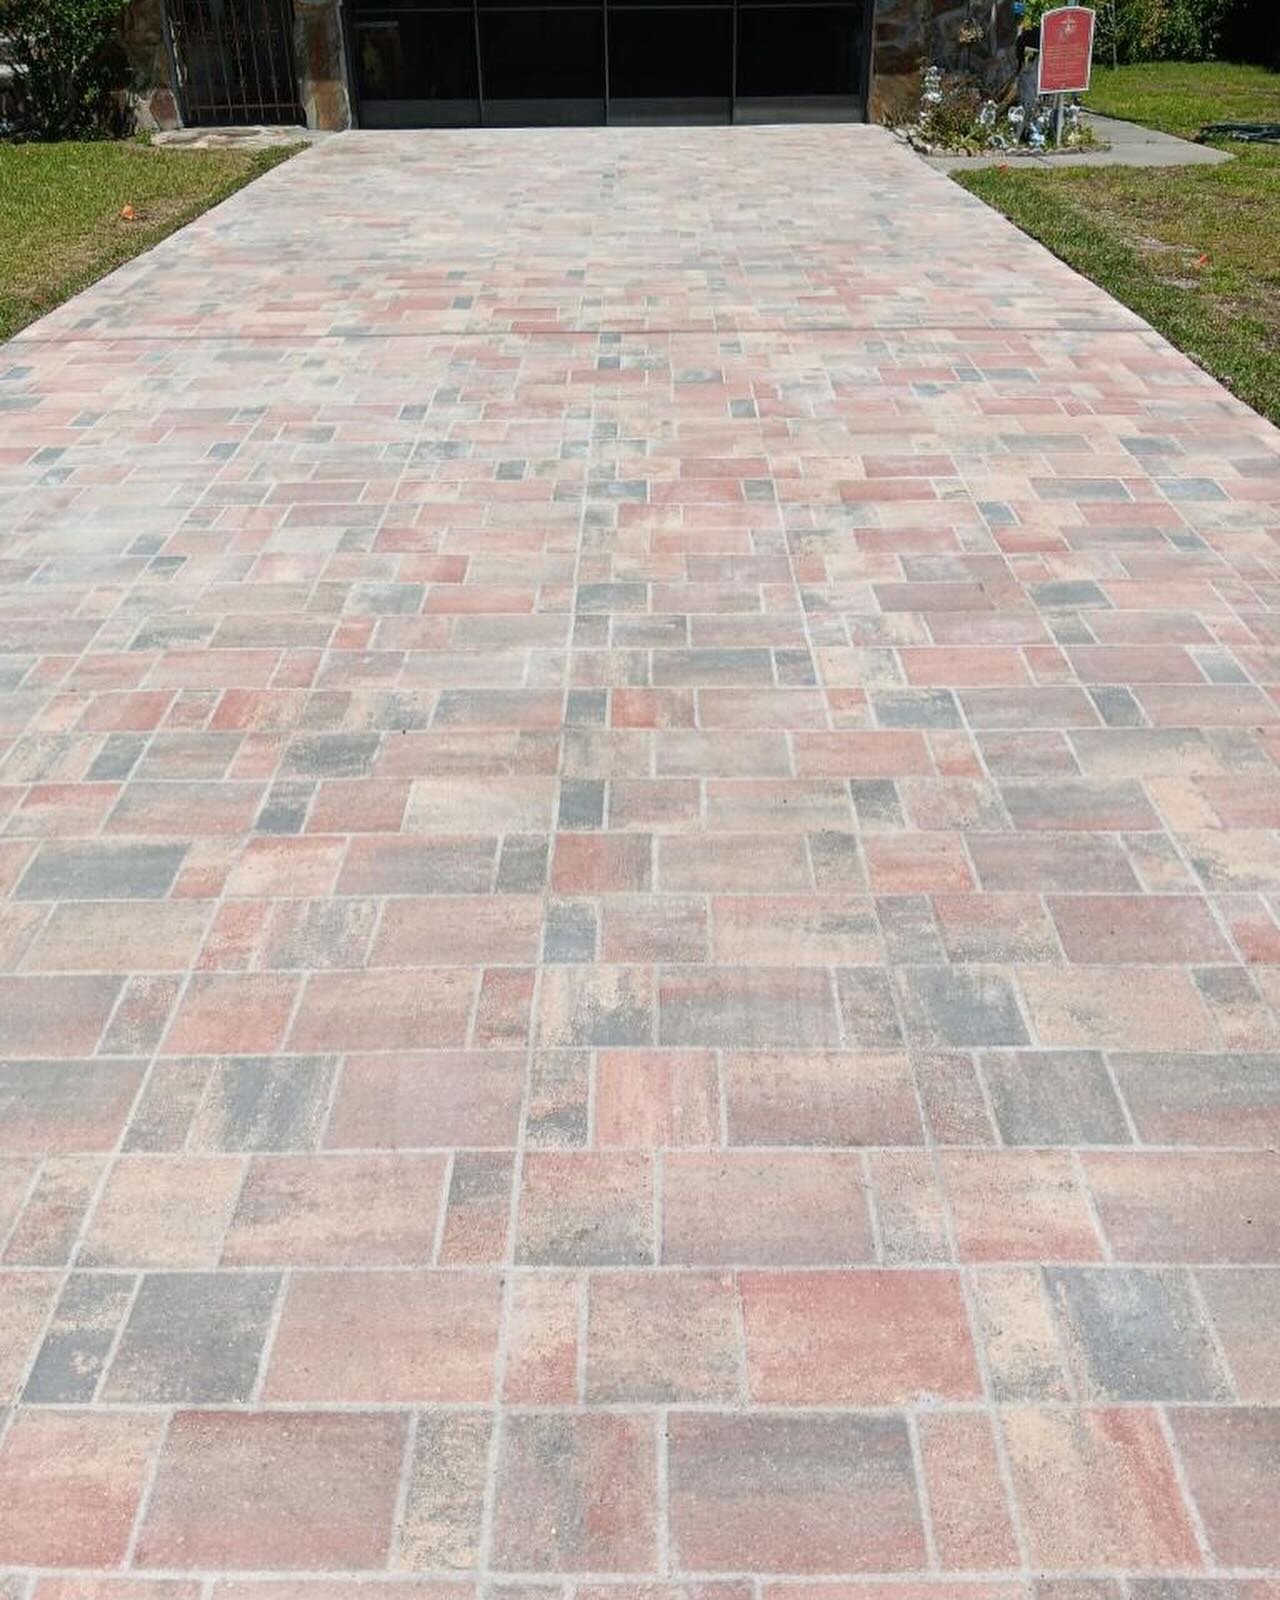 Before &amp; after 
Paver job #pavers #springhill